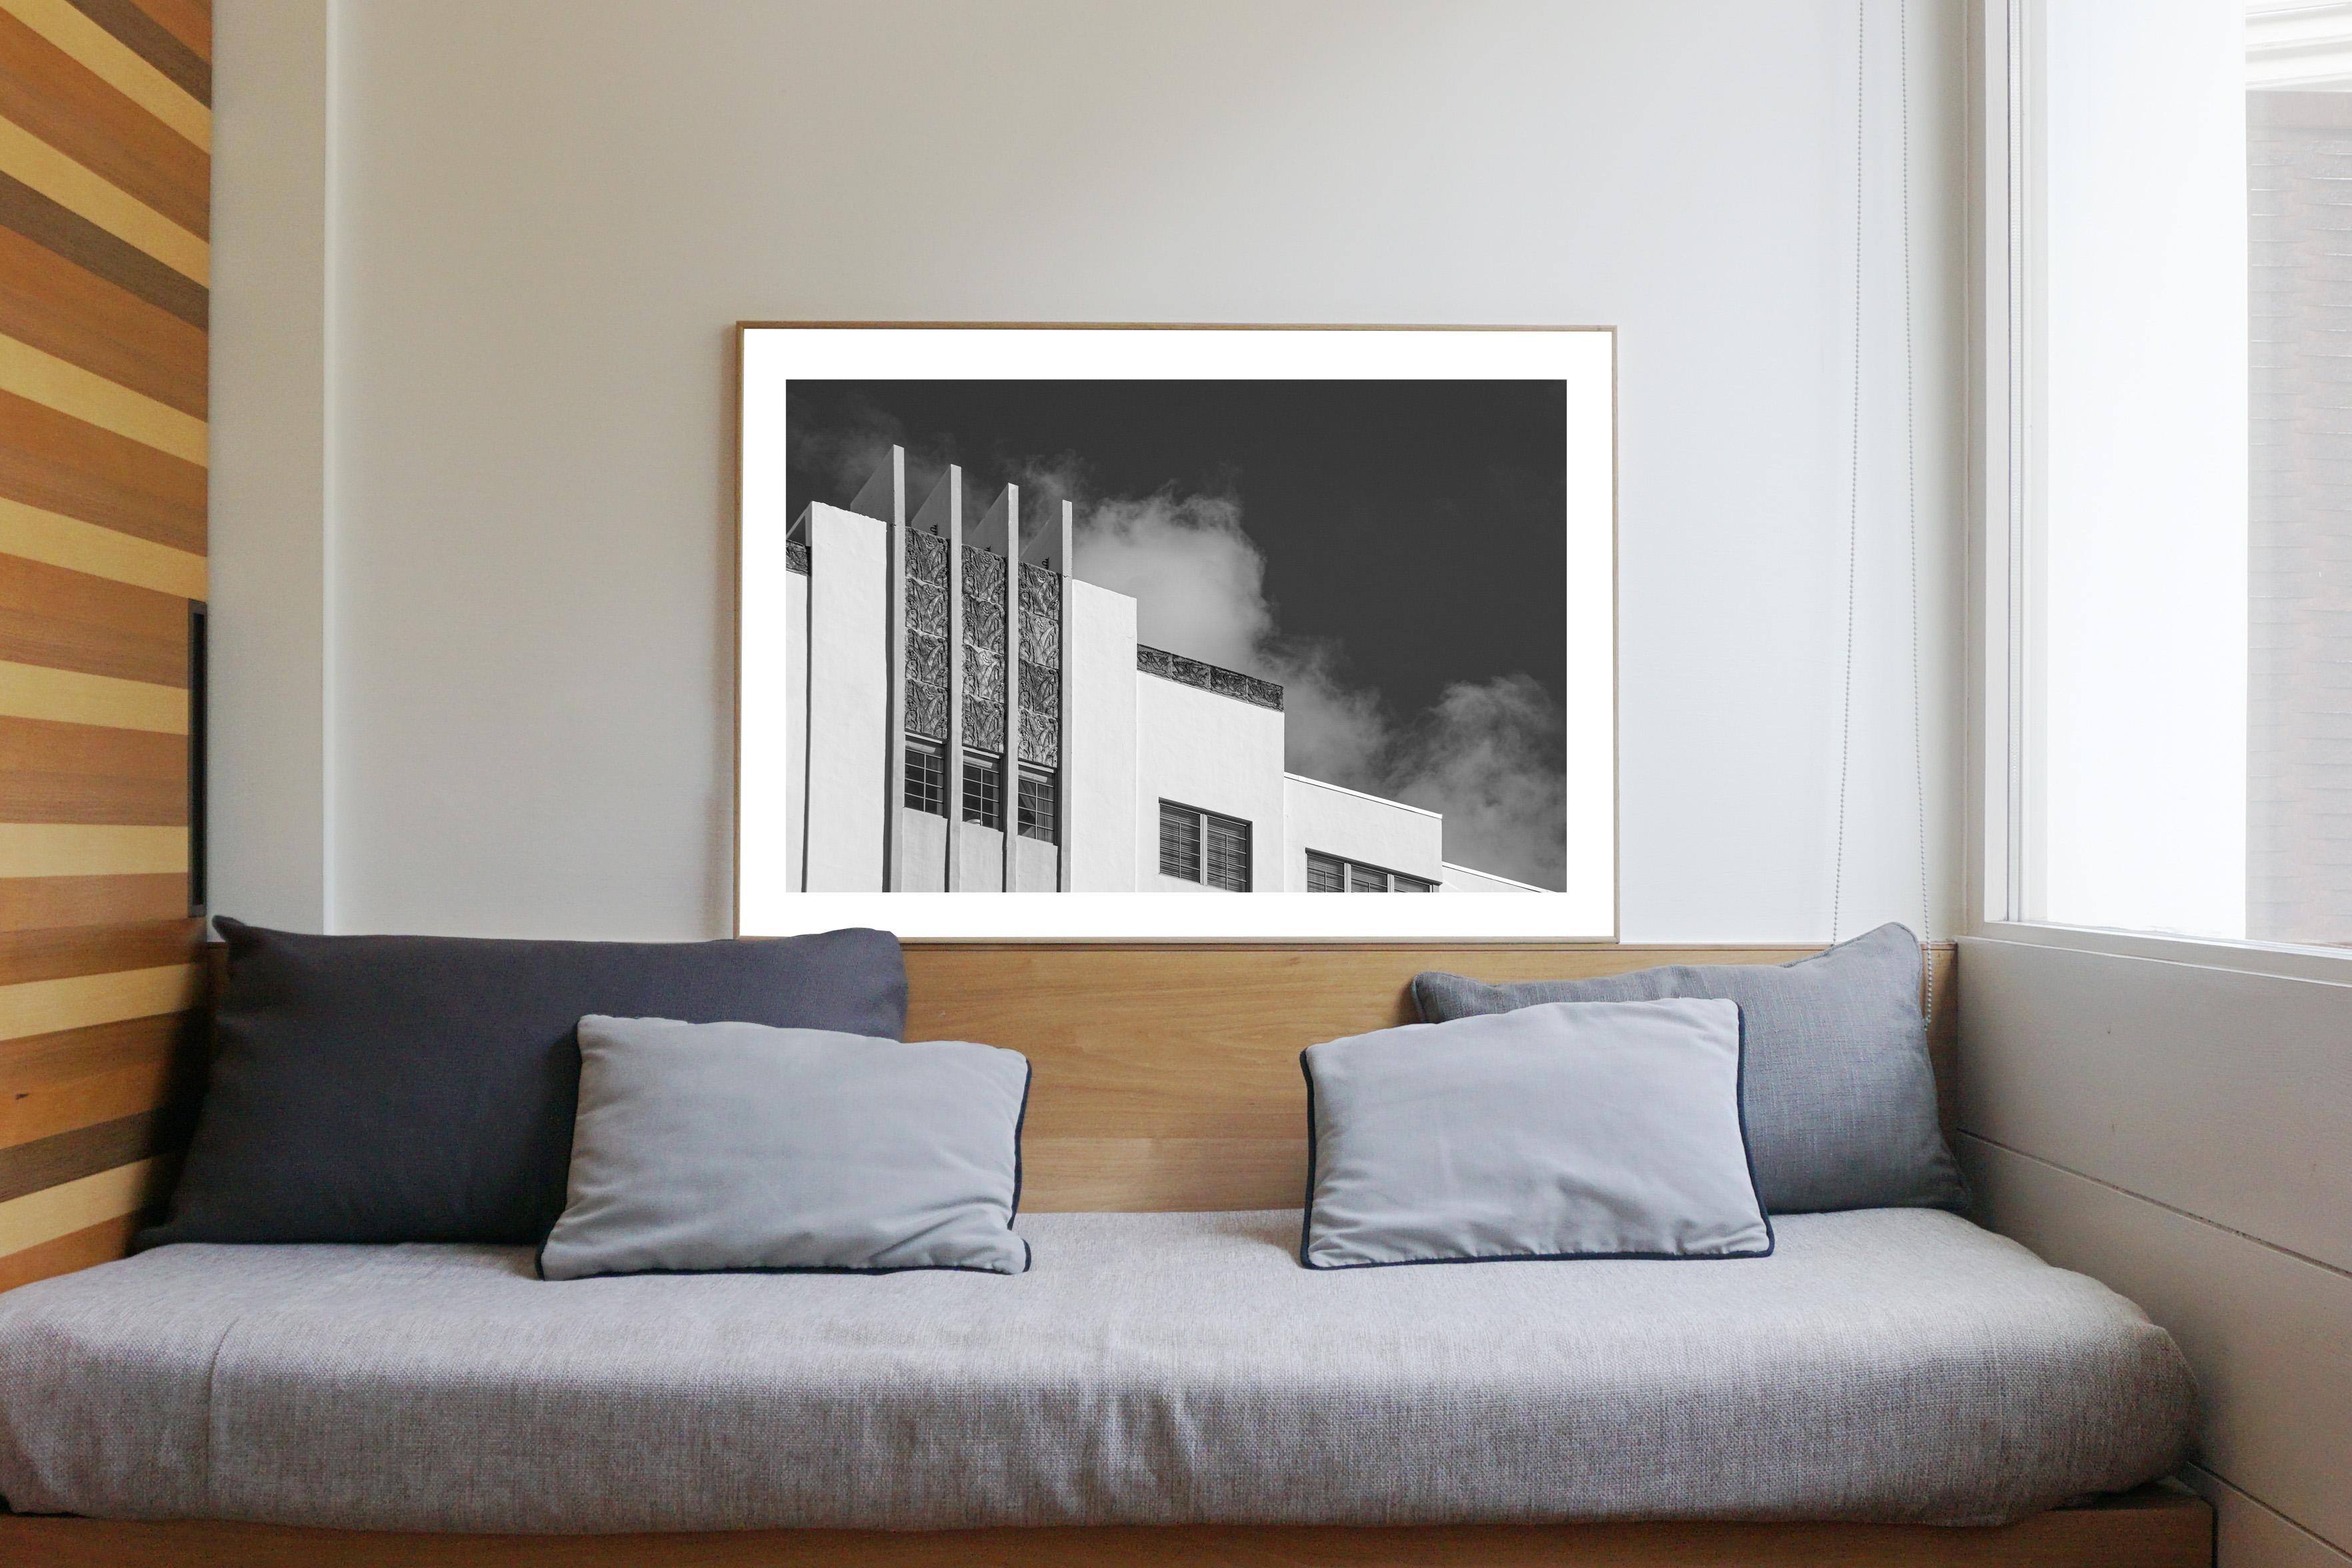 This is an exclusive limited edition black and white Giclée print, on 100% cotton Hahnemühle Photo Rag Fine Art matte paper.

This series of black and white photographs capture stunning minimalist Art Deco buildings in Miami Beach. The building's